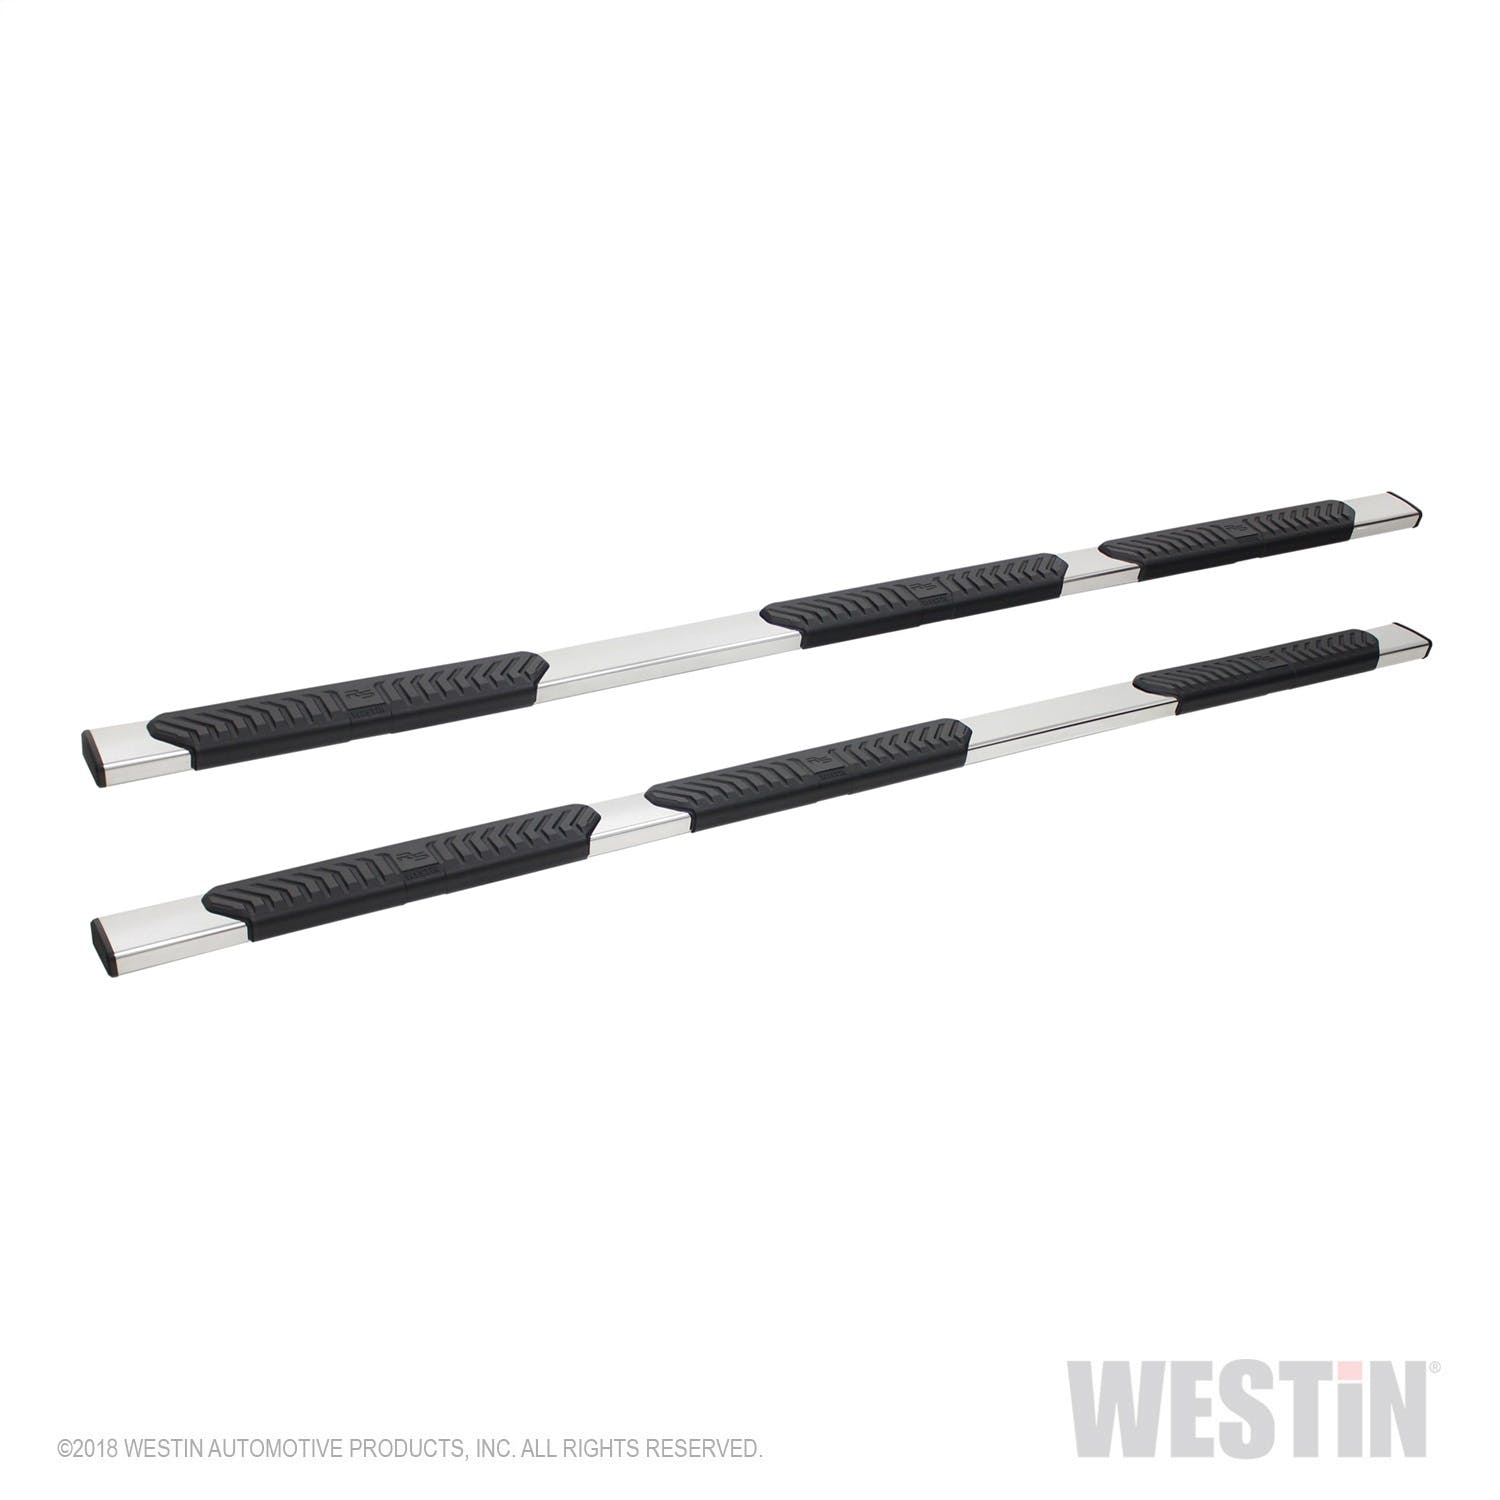 Westin Automotive 28-534320 R5 M-Series Wheel-to-Wheel Nerf Step Bars Polished Stainless